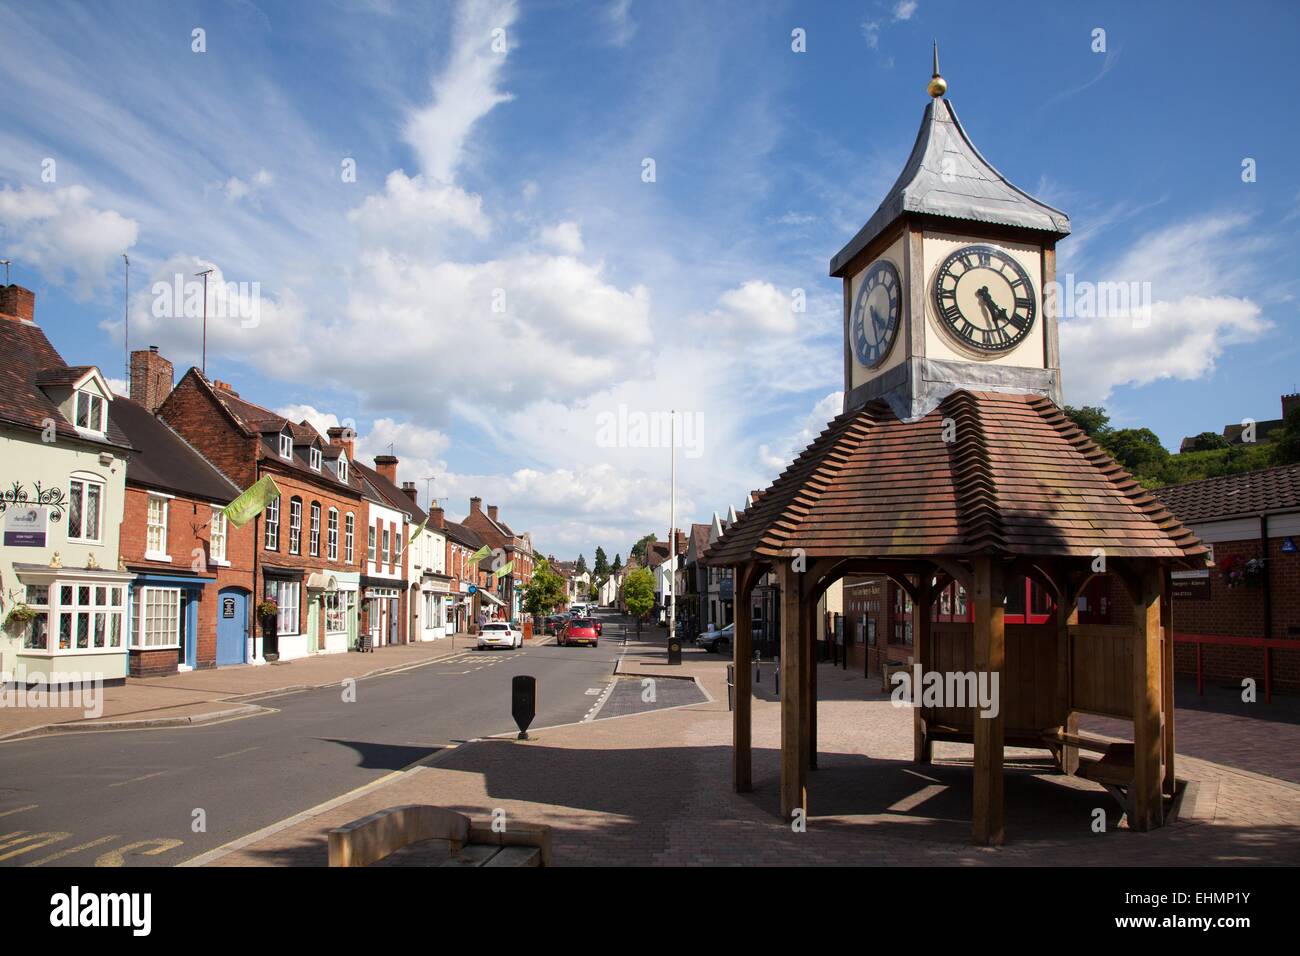 Village centre and clock in Kinver, South Staffotrdshire Stock Photo